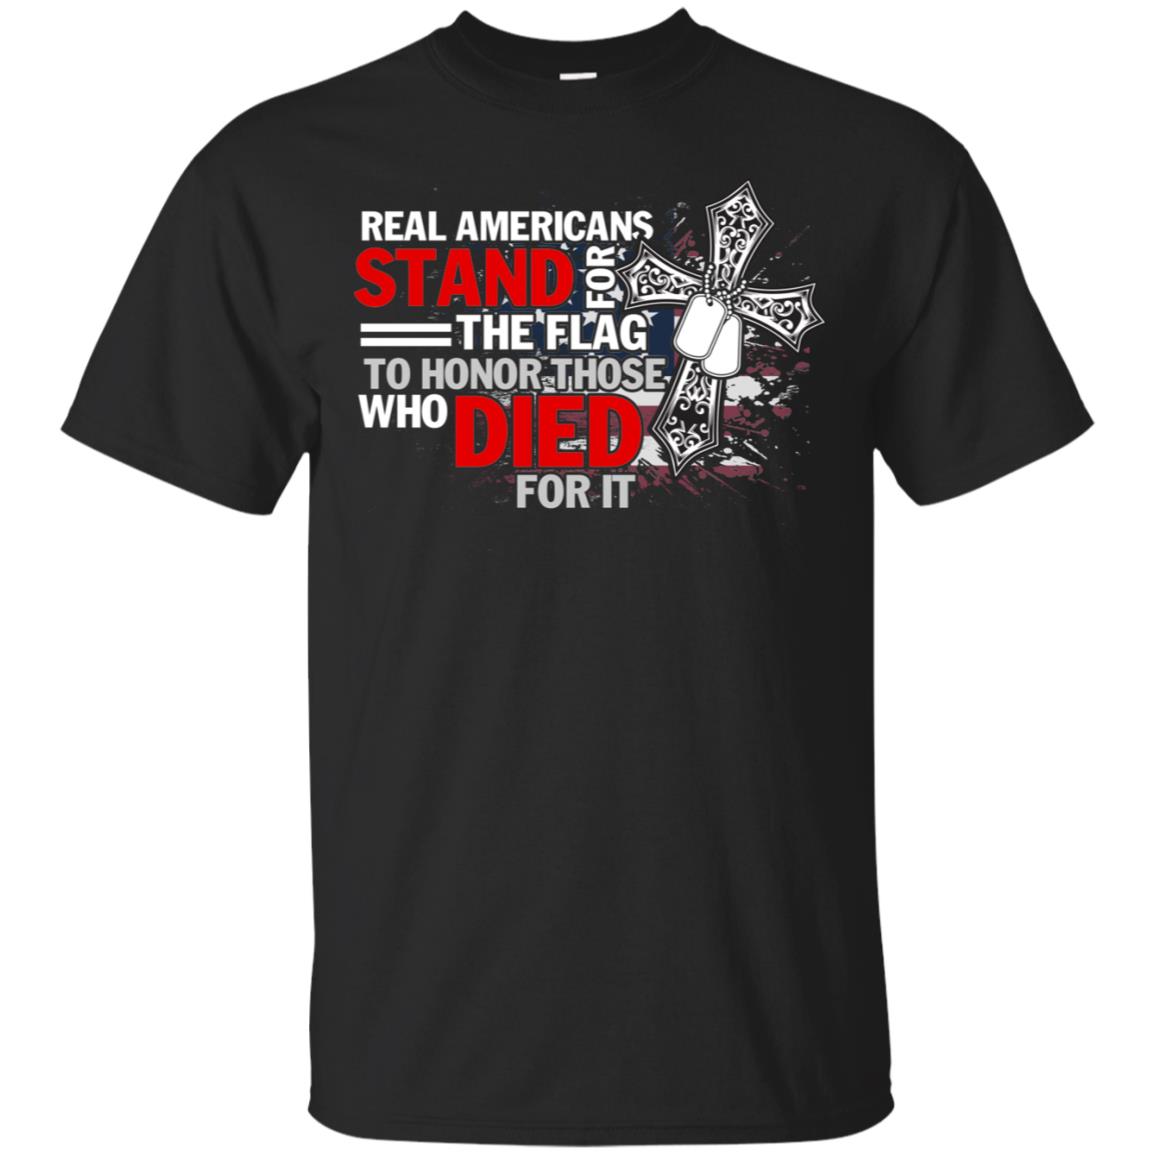 Real Americans Stand For The Flag To Honor Those Who Died For It Veteran ShirtG200 Gildan Ultra Cotton T-Shirt